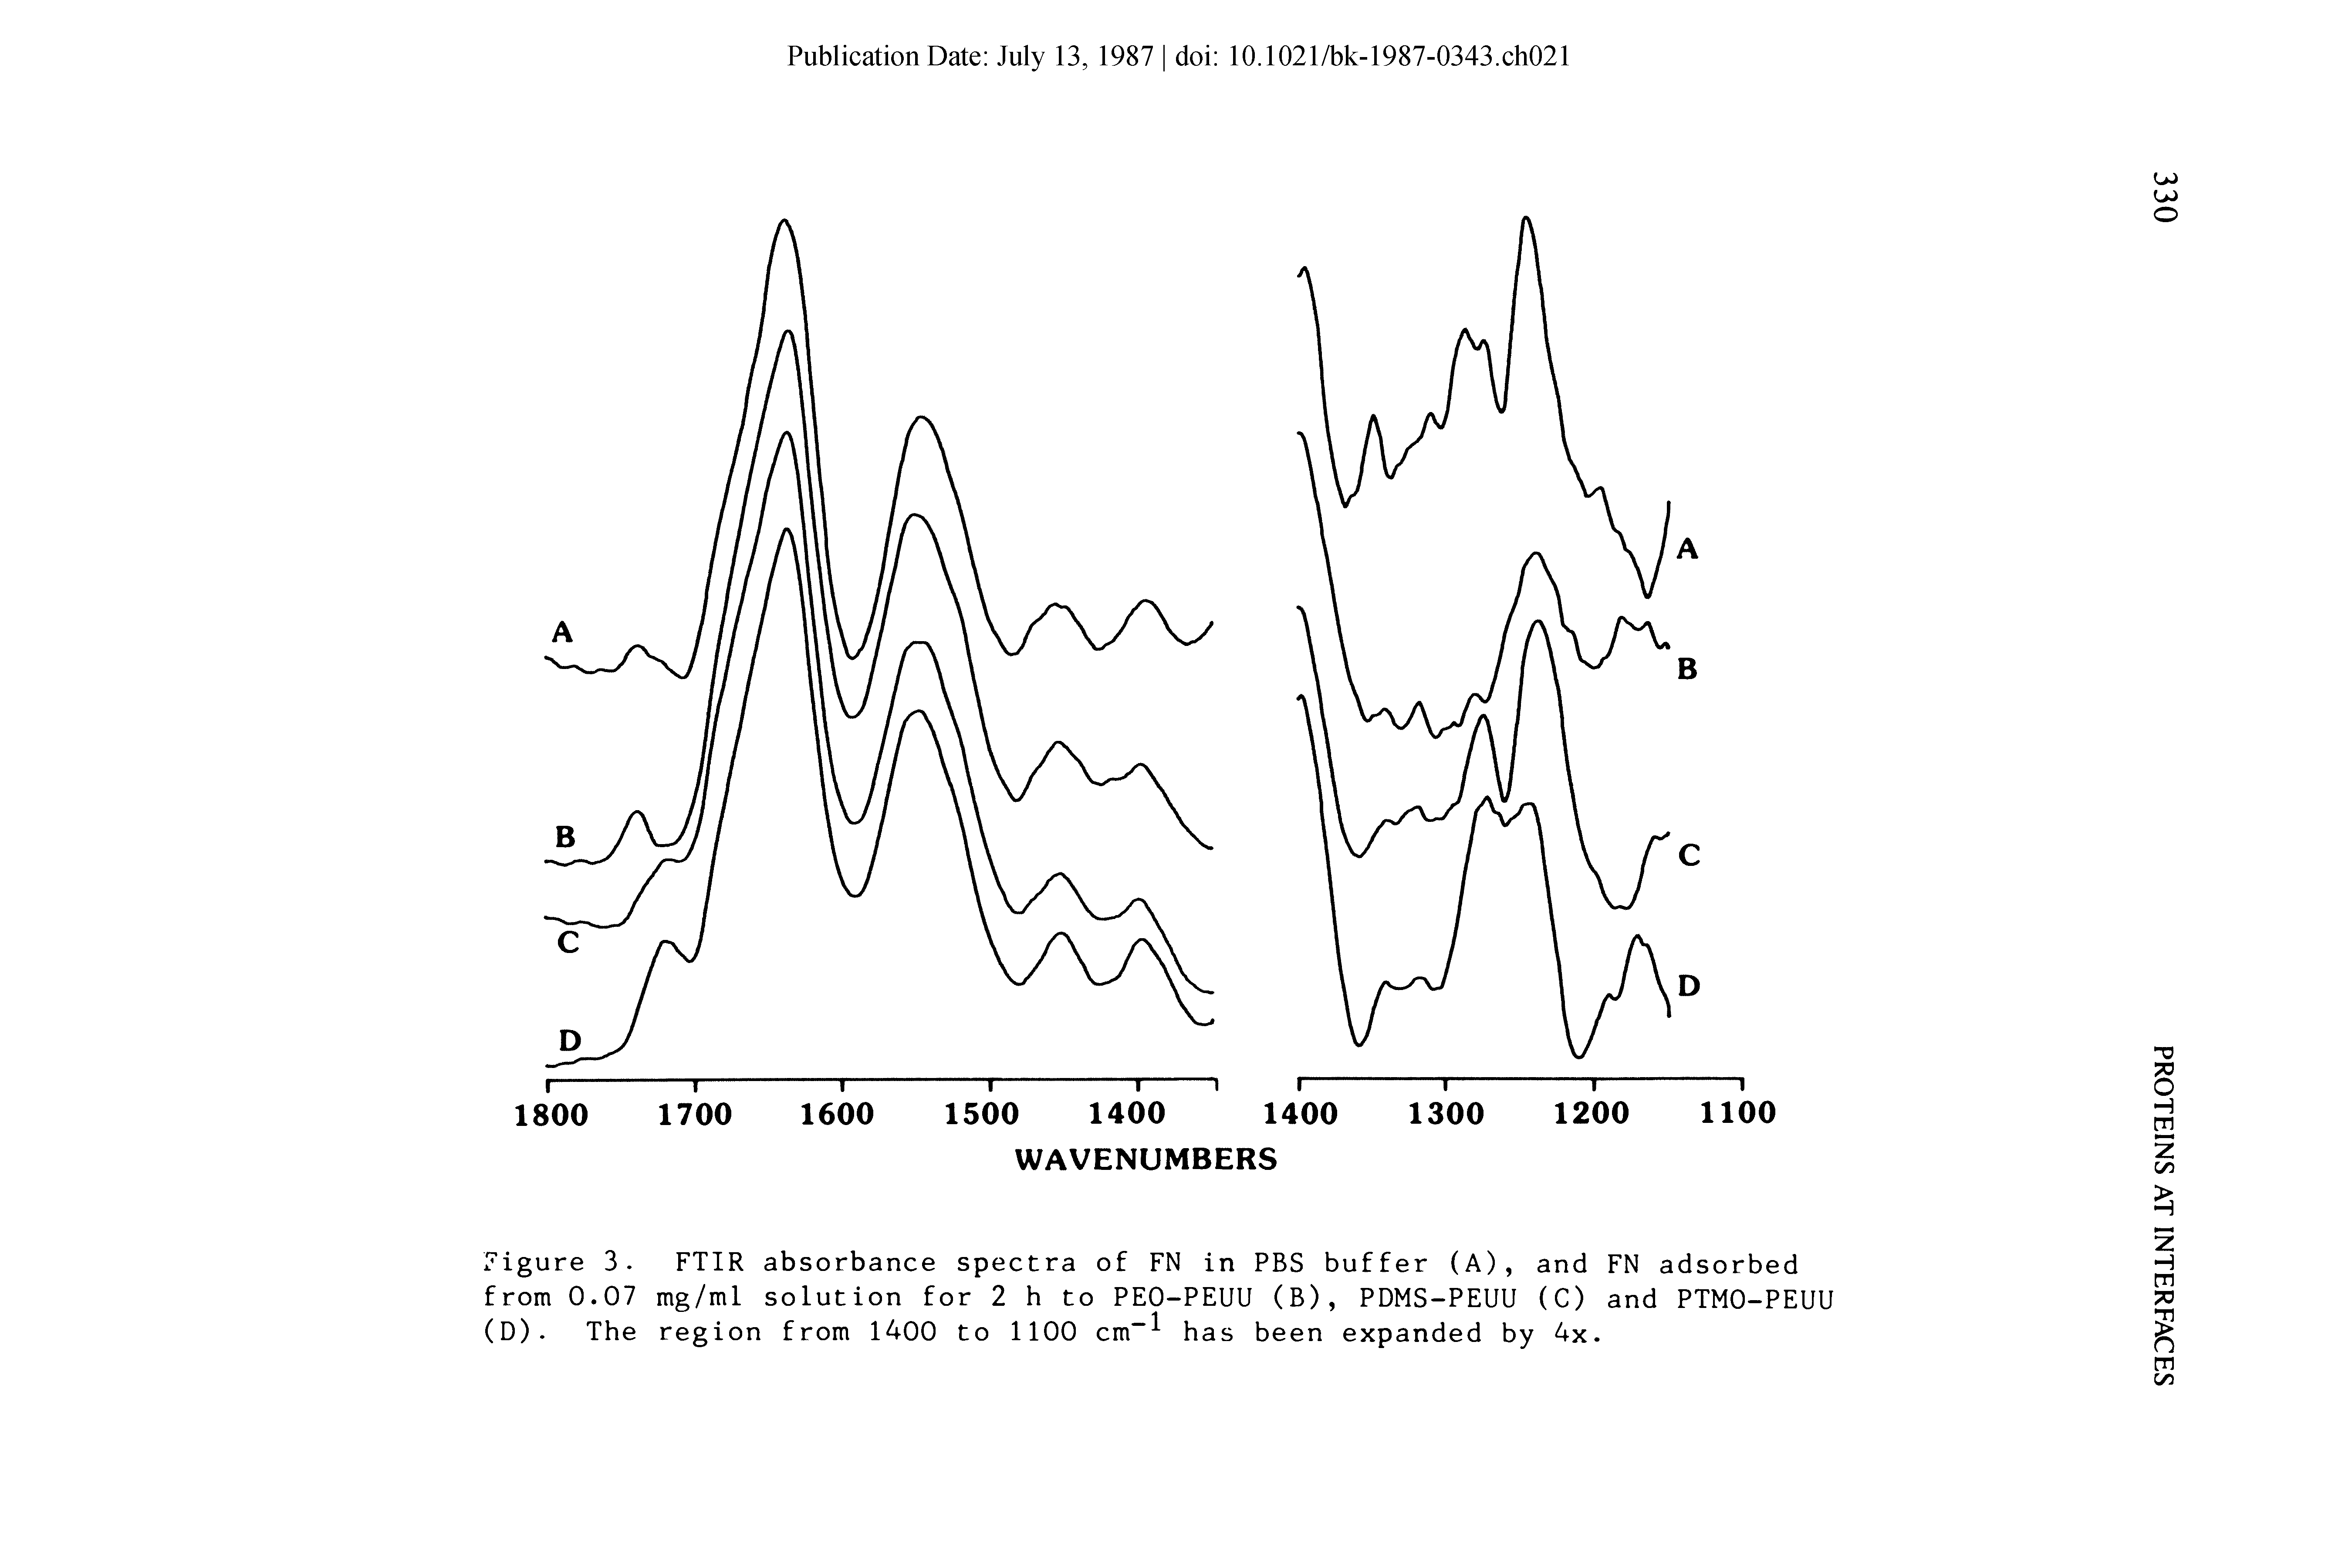 Figure 3. FTIR absorbance spectra of FN in PBS buffer (A), and FN adsorbed from 0.07 mg/ml solution for 2 h to PEO-PEUU (B), PDMS-PEUU (C) and PTMO-PEUU (D). The region from 1400 to 1100 cm has been expanded by 4x.